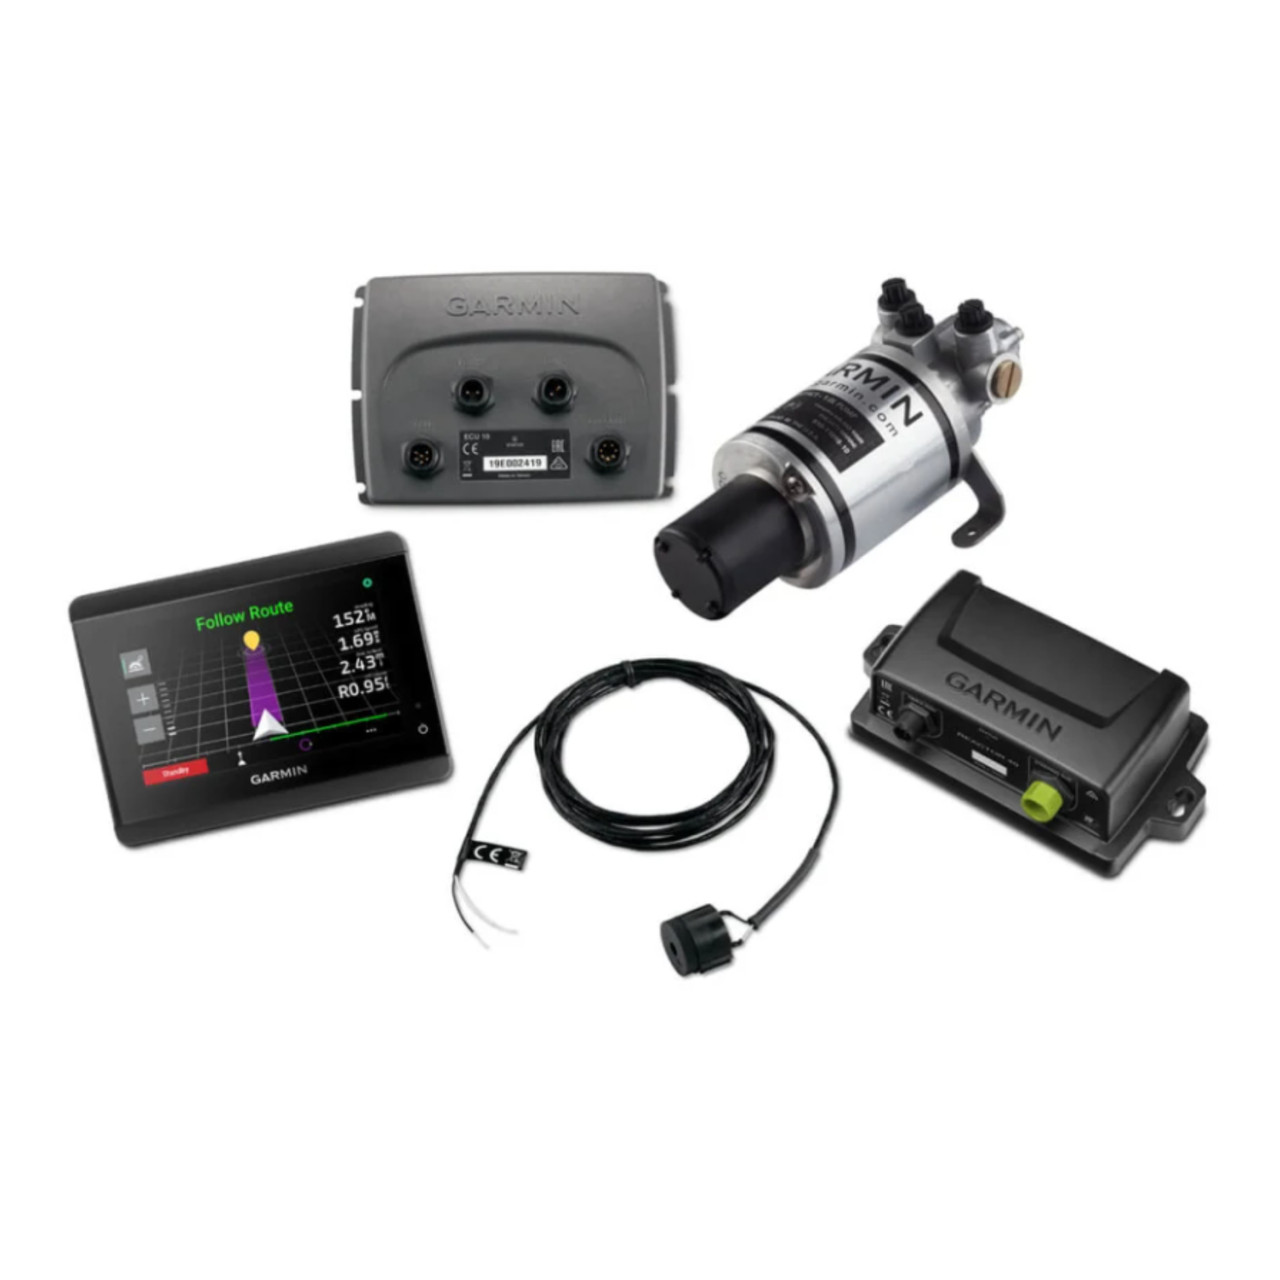 Garmin New OEM Compact Reactor™ 40 Hydraulic Autopilot with GHC™ 50 Instrument Pack, 010-02794-07